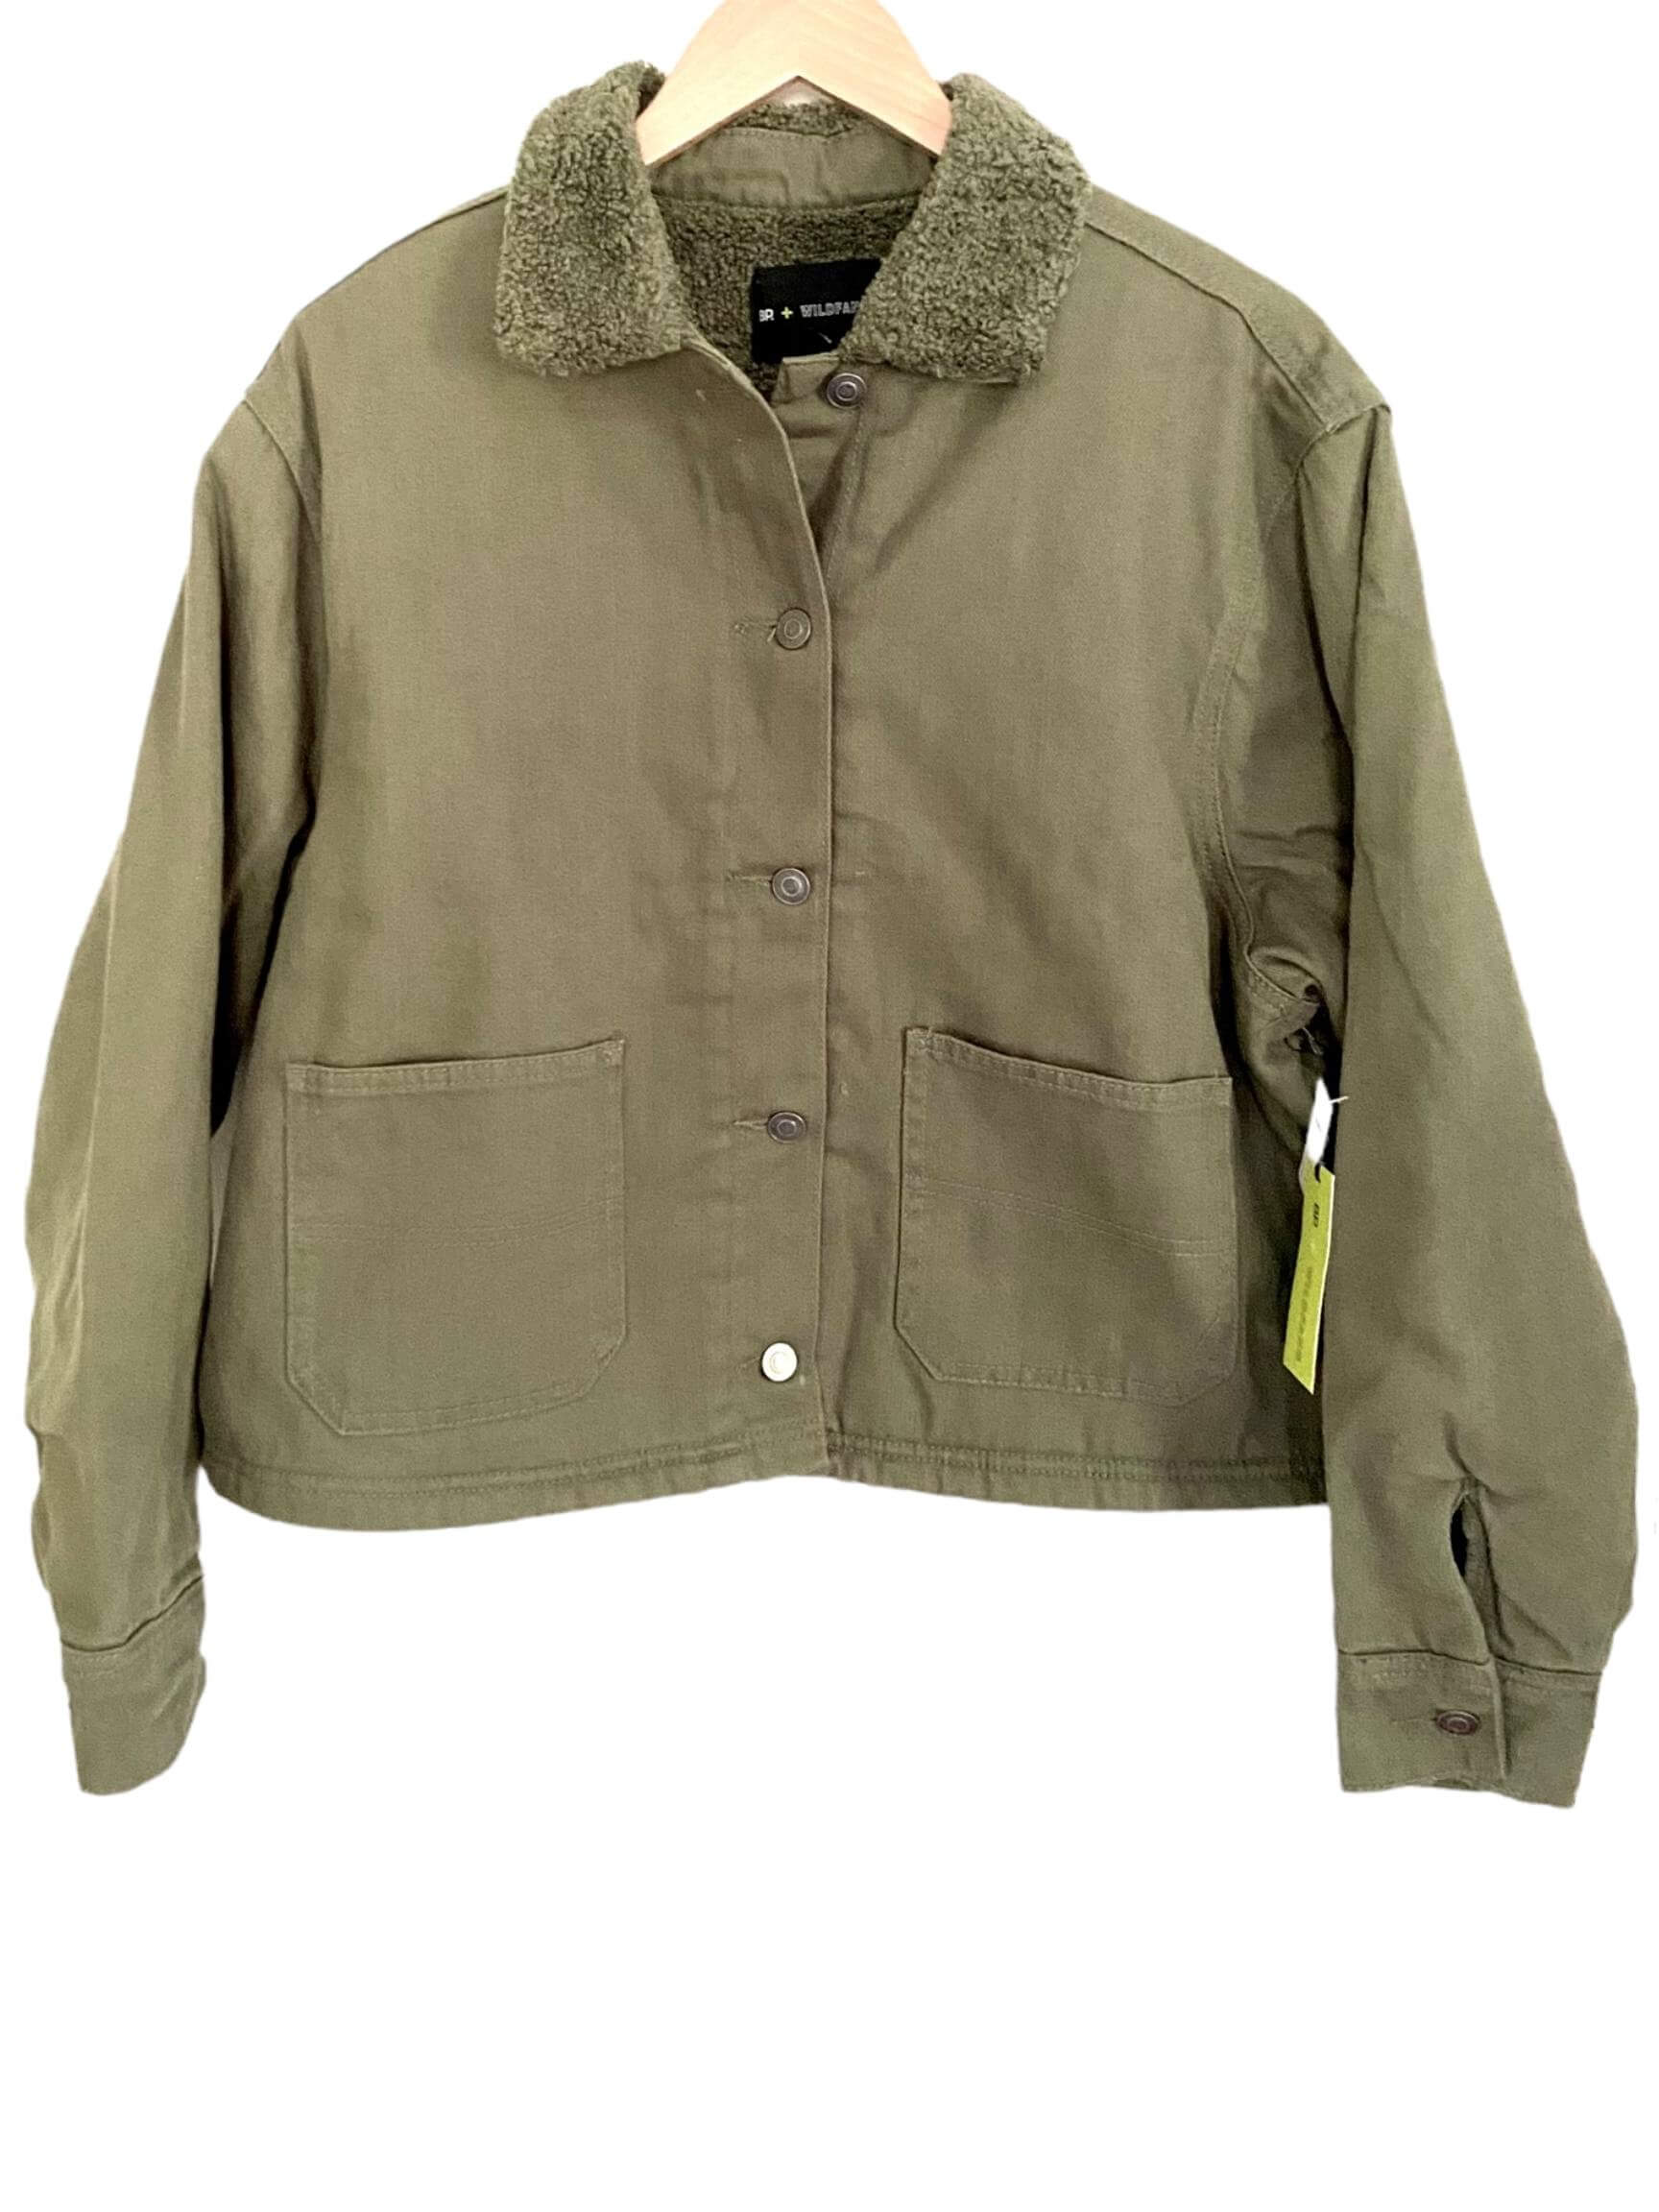 Soft Autumn BP WILDFANG olive green coat